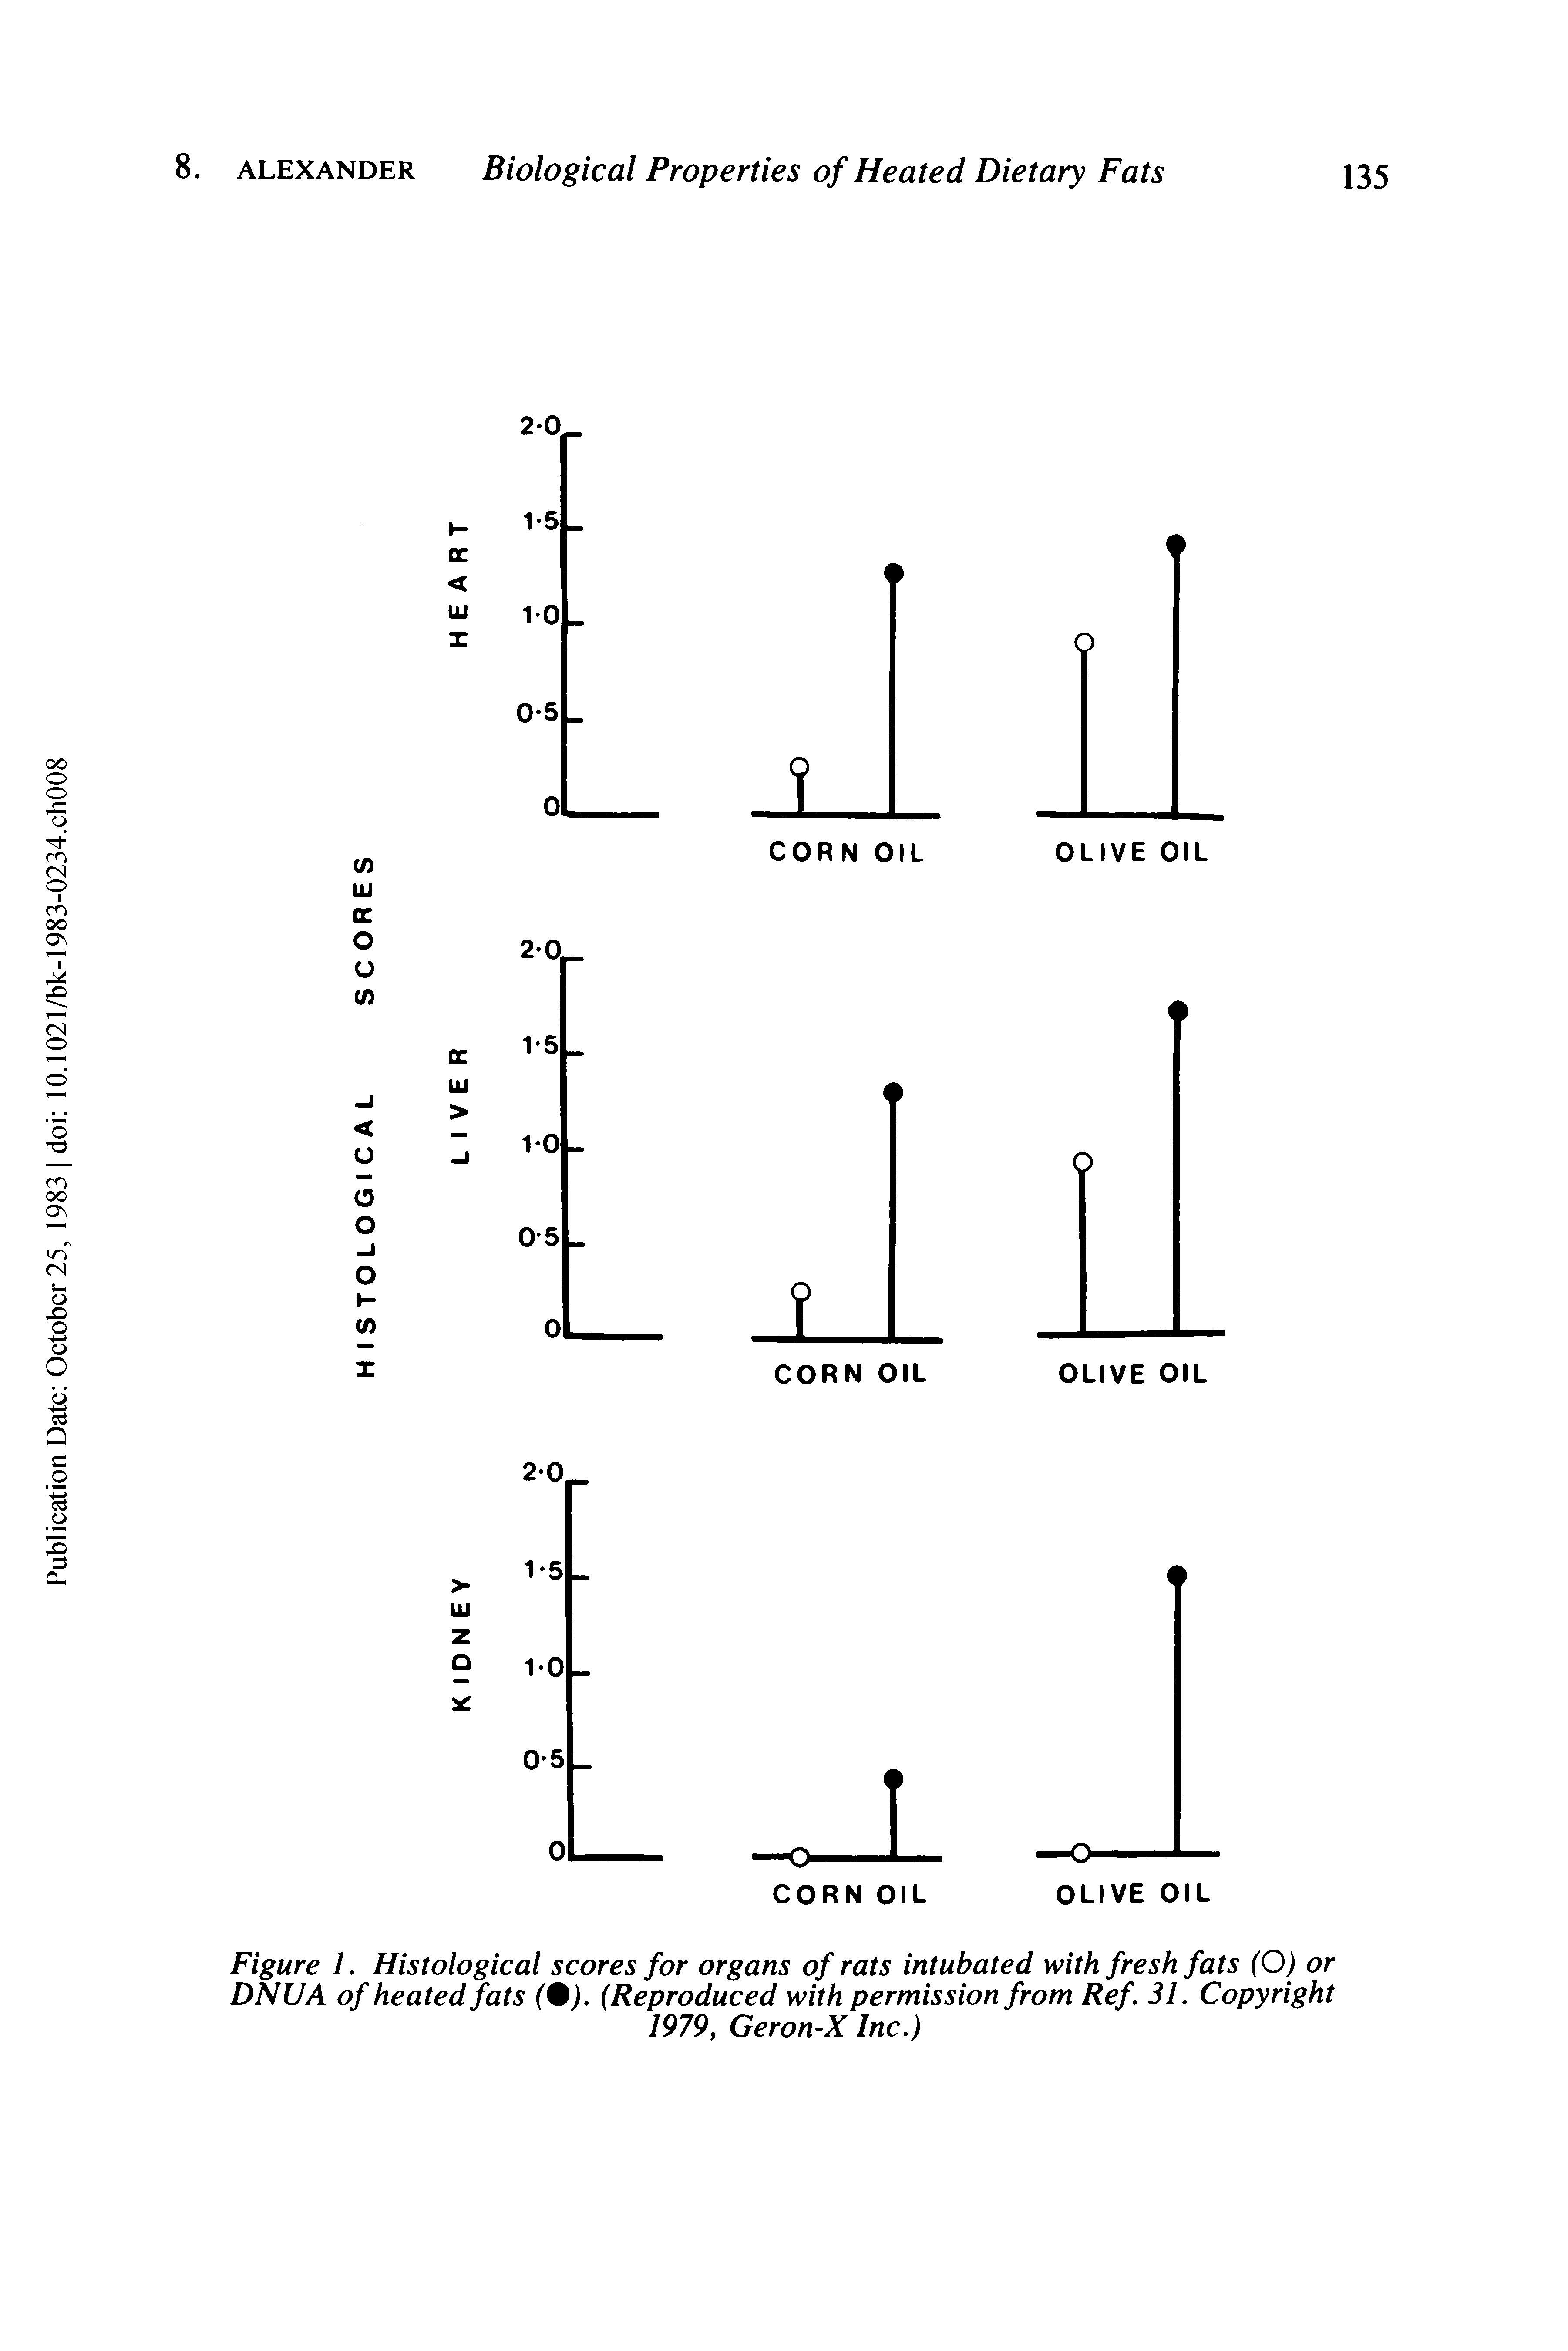 Figure 1. Histological scores for organs of rats intubated with fresh fats (O) or DNUA of heated fats (%). (Reproduced with permission from Ref. 31. Copyright...